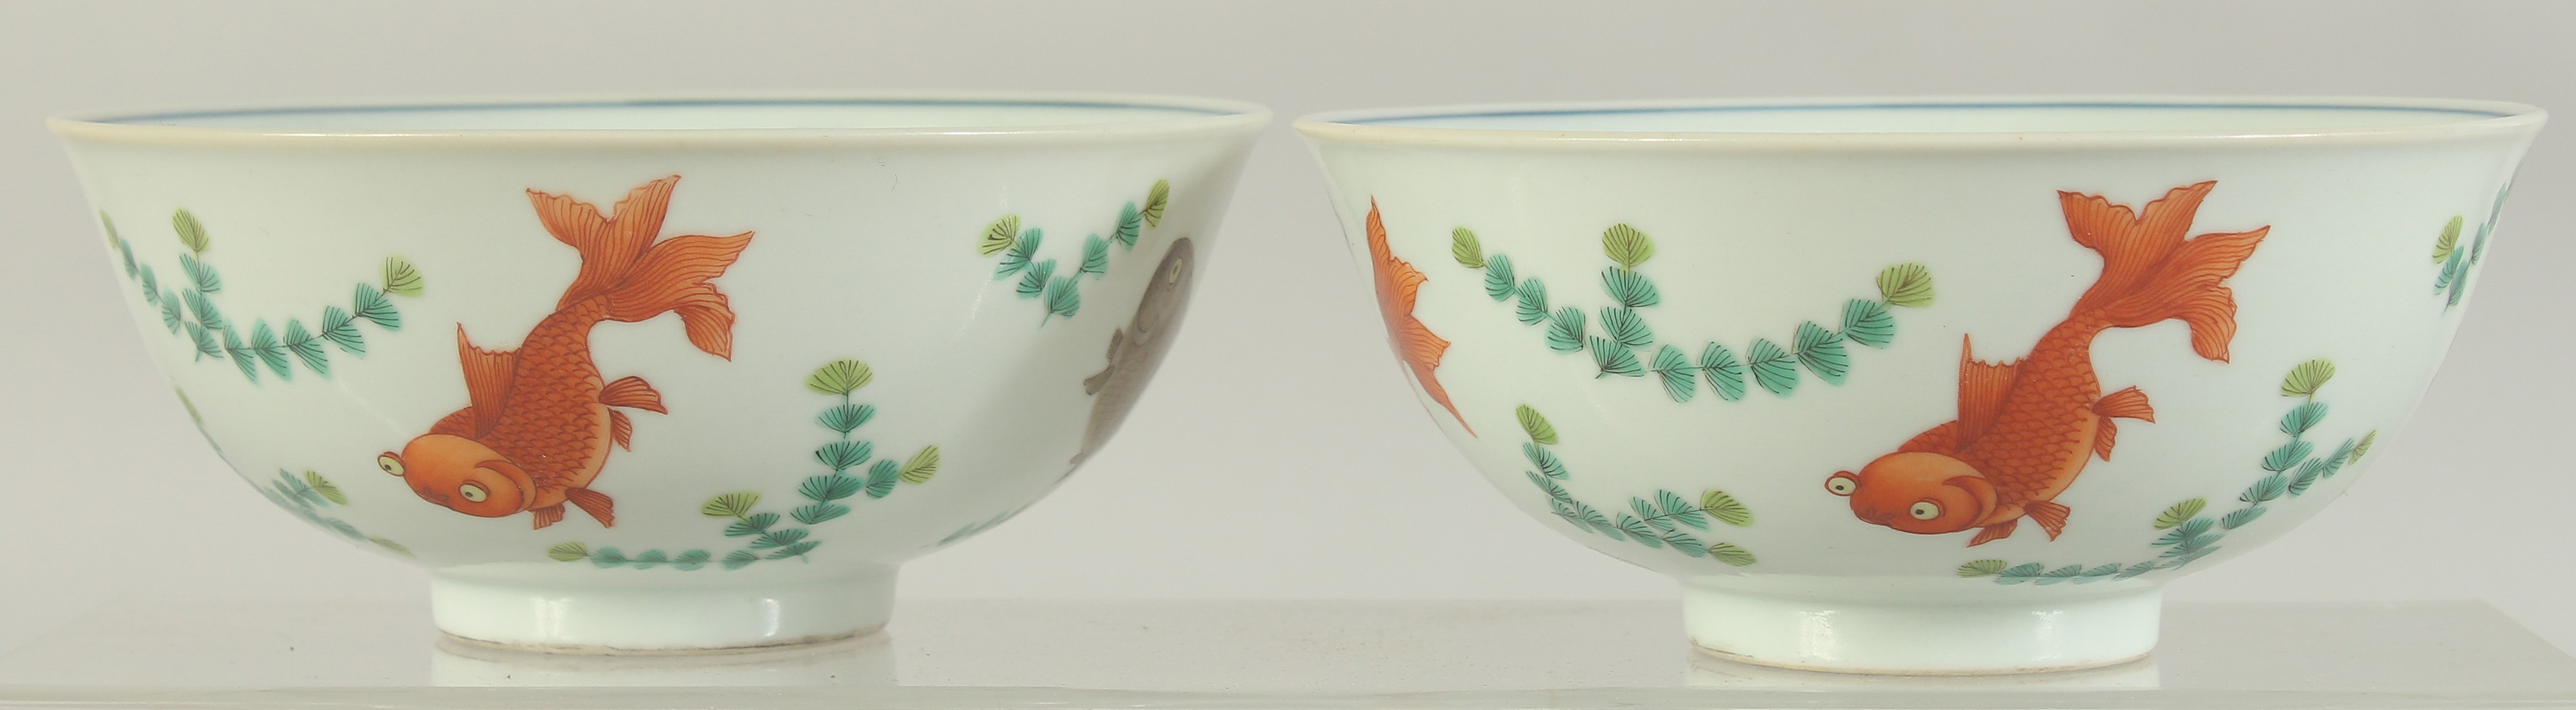 A PAIR OF CHINESE FAMILLE ROSE PORCELAIN BOWLS, the exterior painted with coral red fish, the - Image 3 of 9